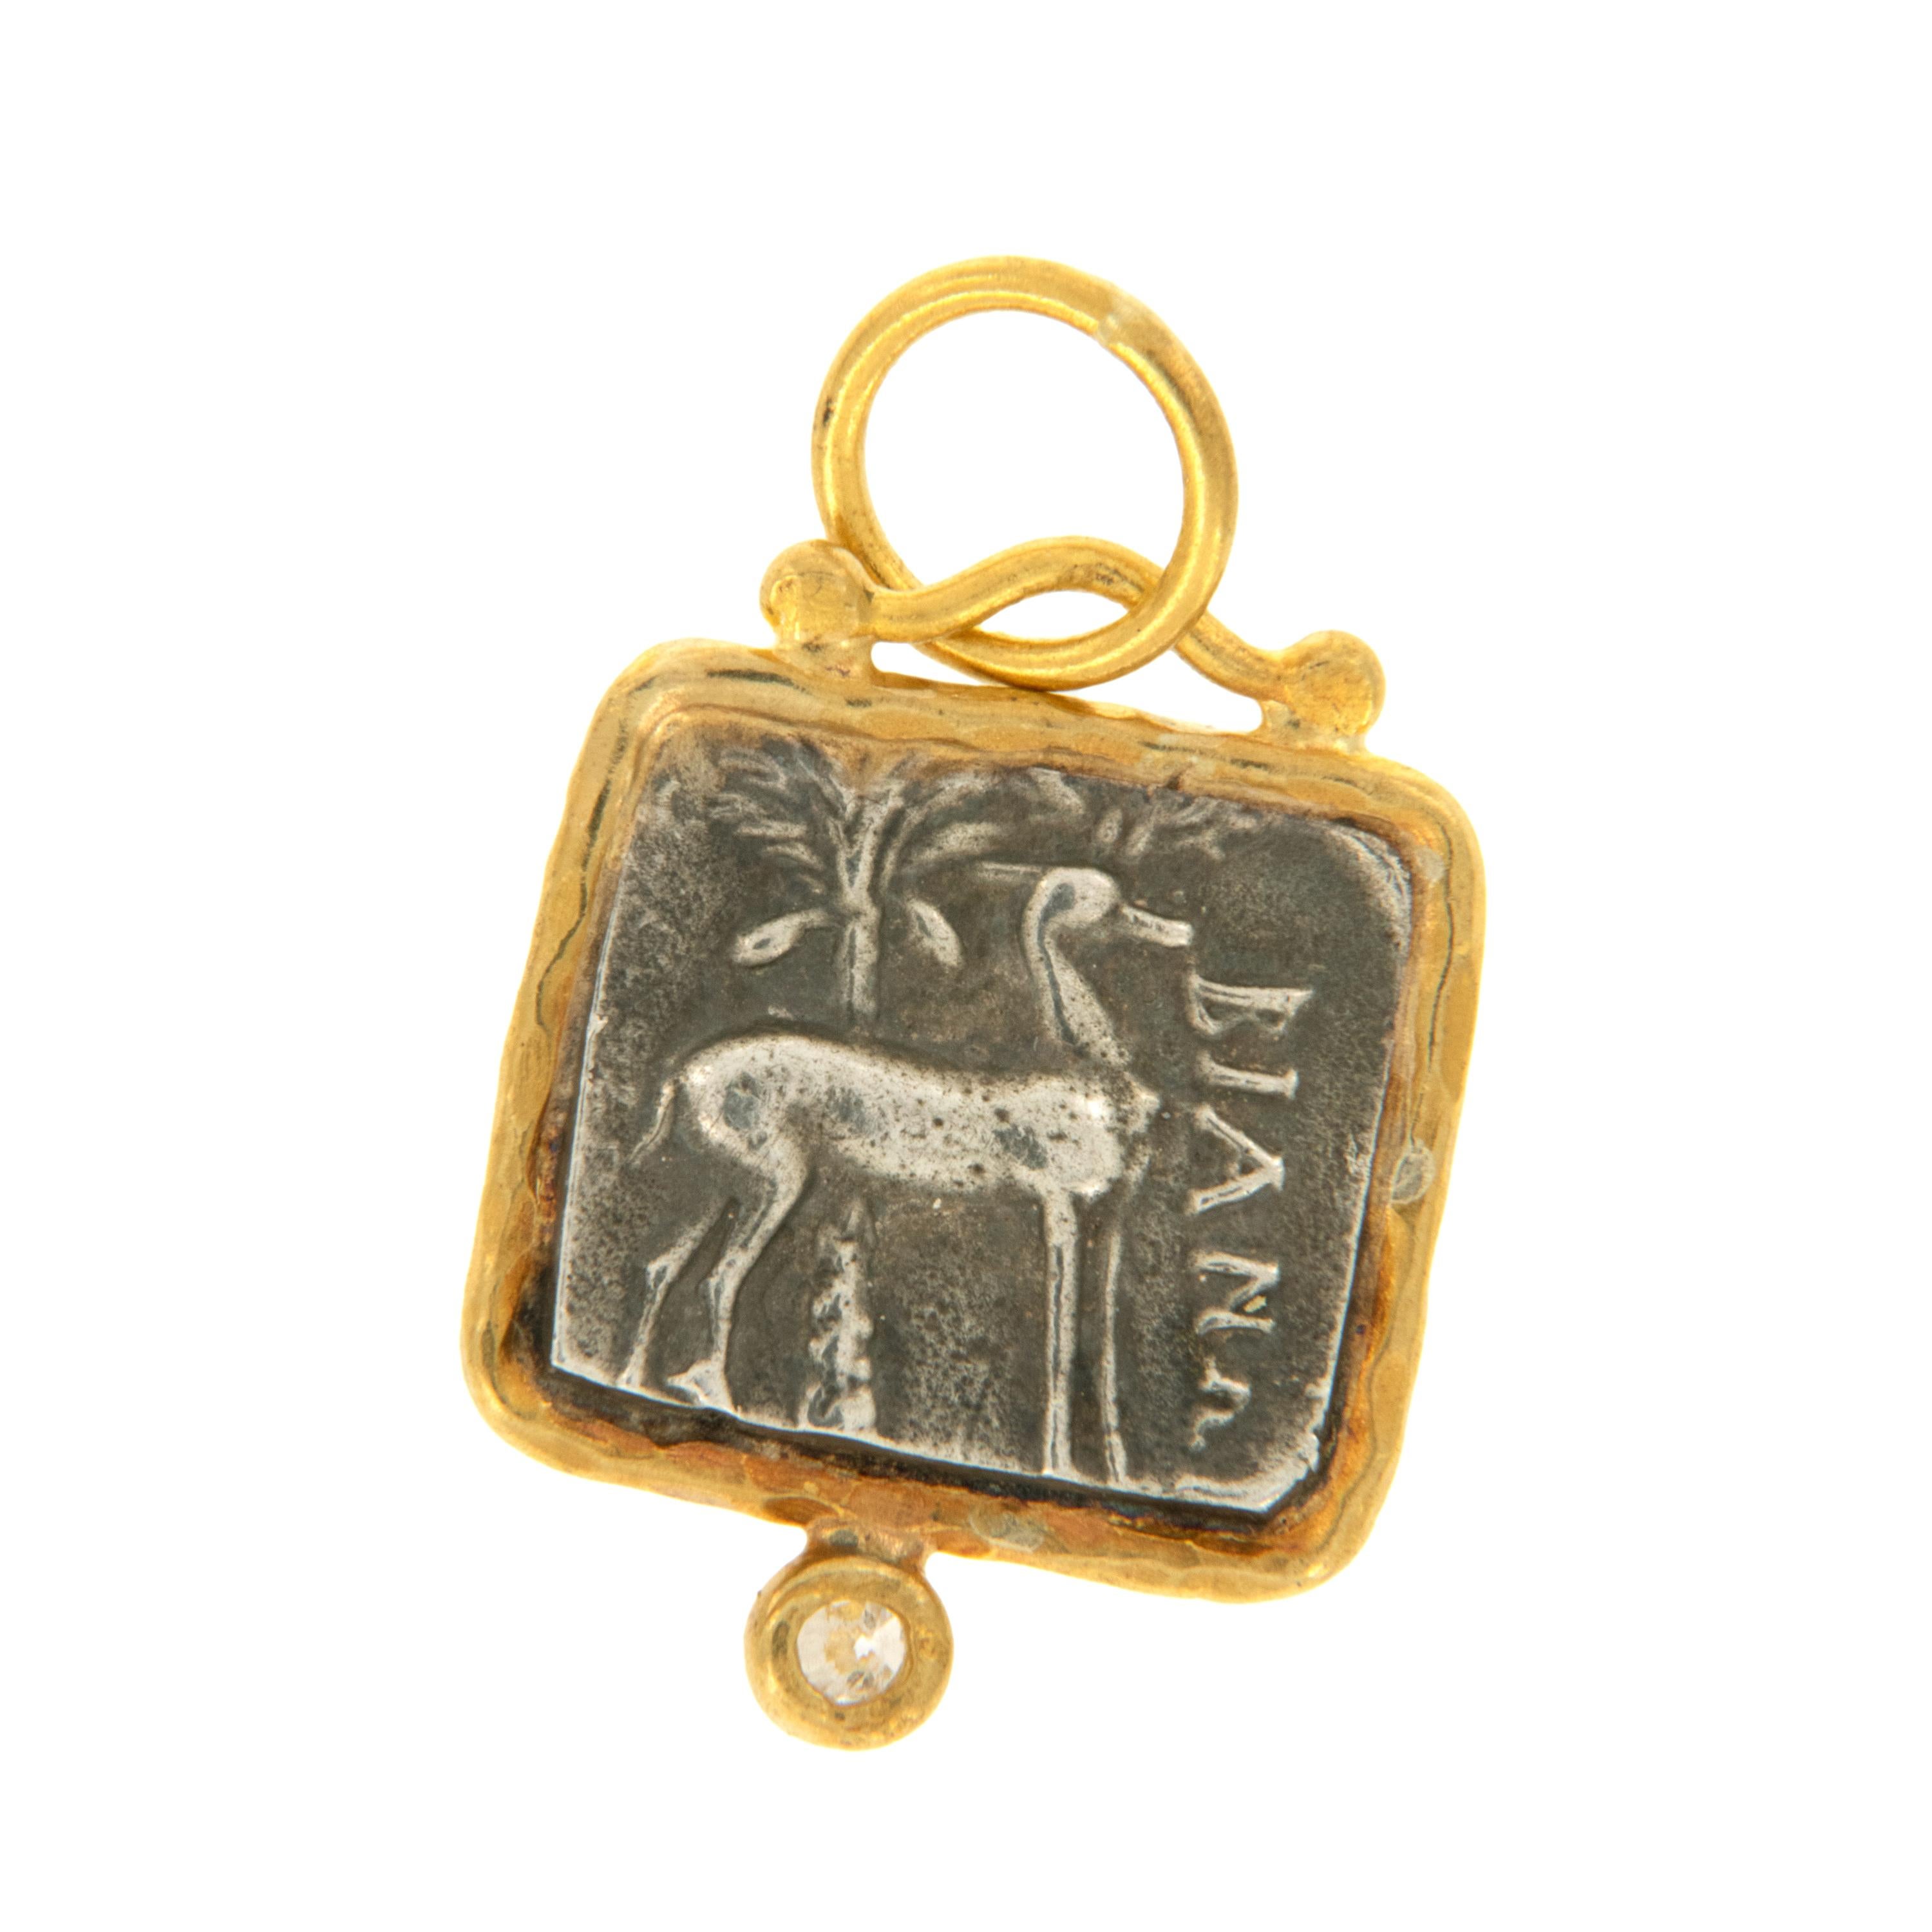 Rarest of all the golds, 24 karat gold is valued by all discerning investors. With it's unmistakable warm yellow color & hammered finish this ancient square replica Ephesus coin with queen bee and stag  accented with diamond is truly museum quality.